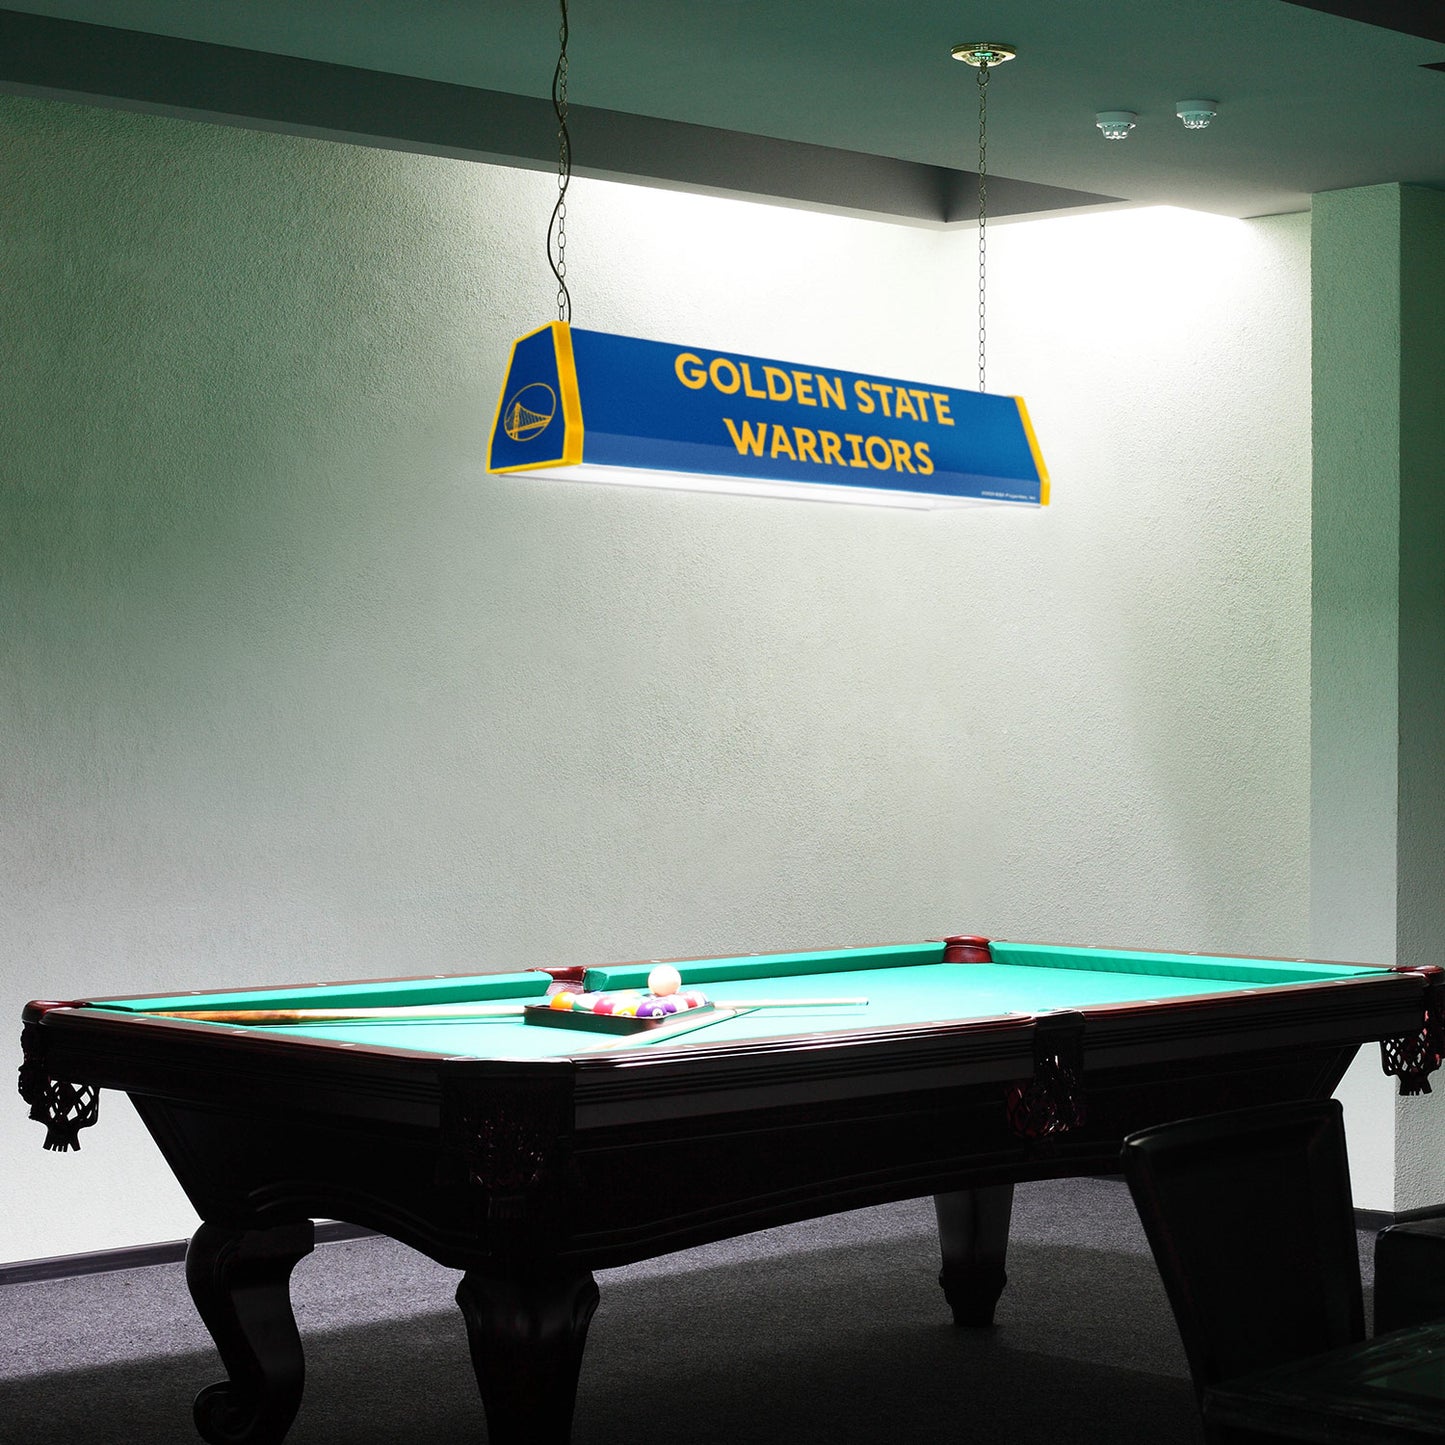 Golden State Warriors Standard Pool Table Light Room View